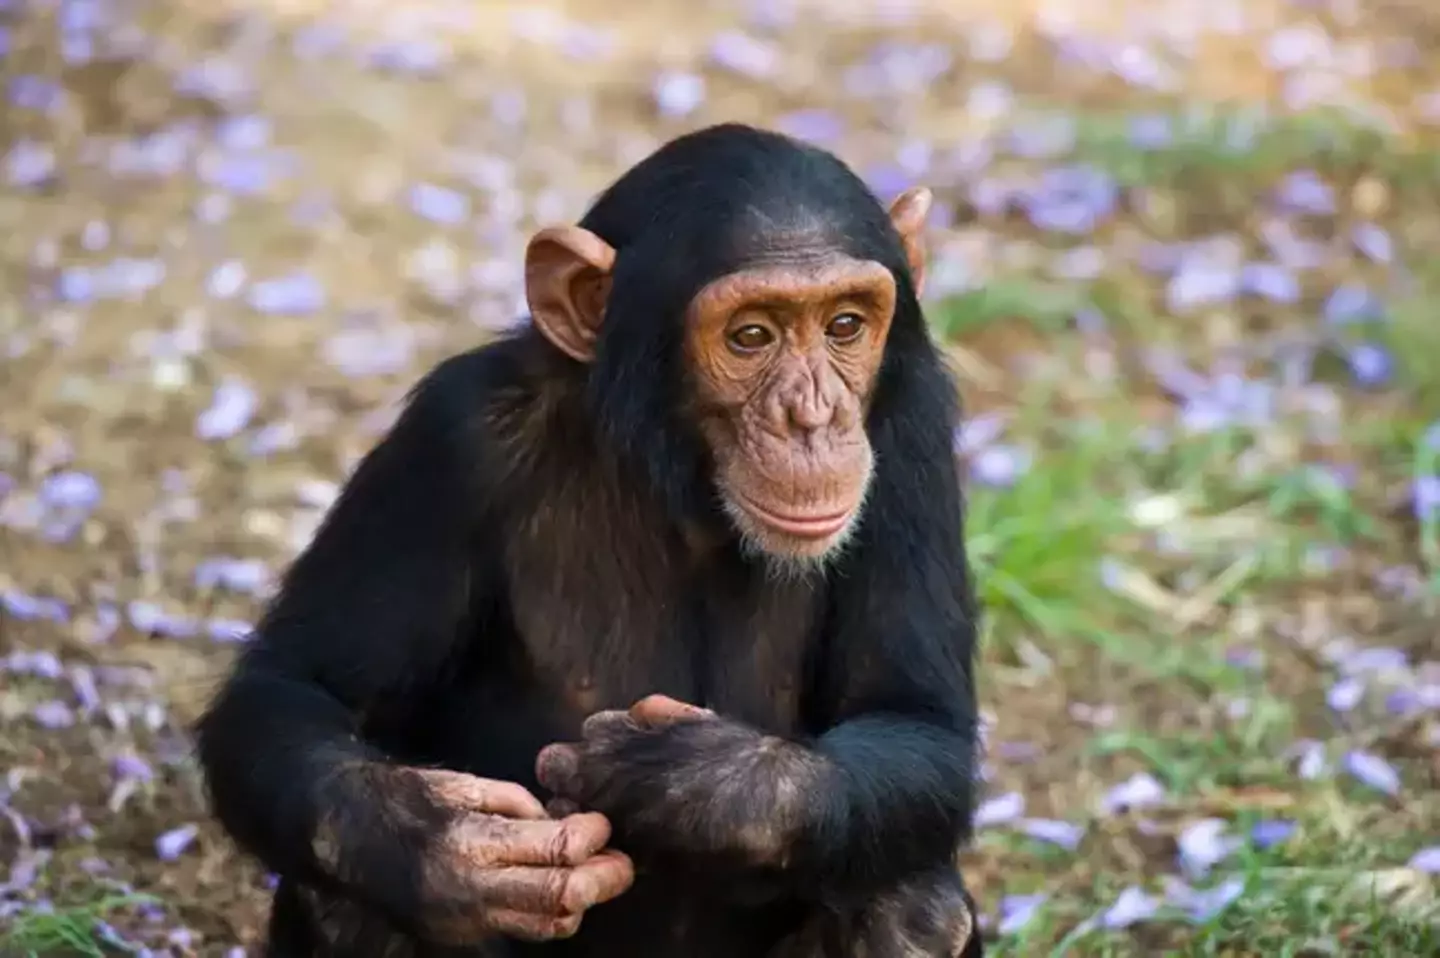 We're still waiting to hear about a 'talking chimpanzee'.